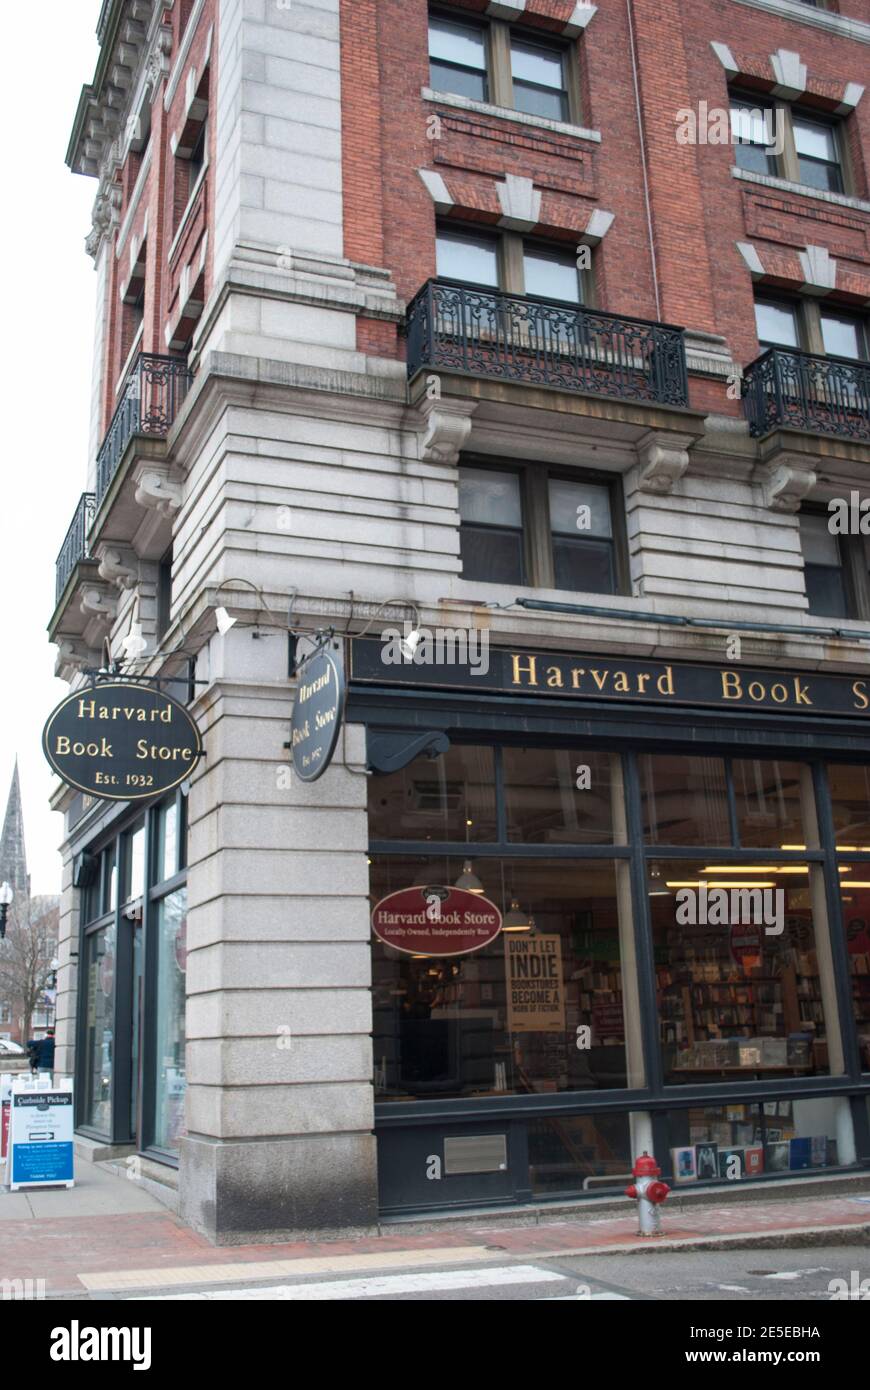 Harvard Book store. Historical places of the U.S. during pandemic. Stock Photo